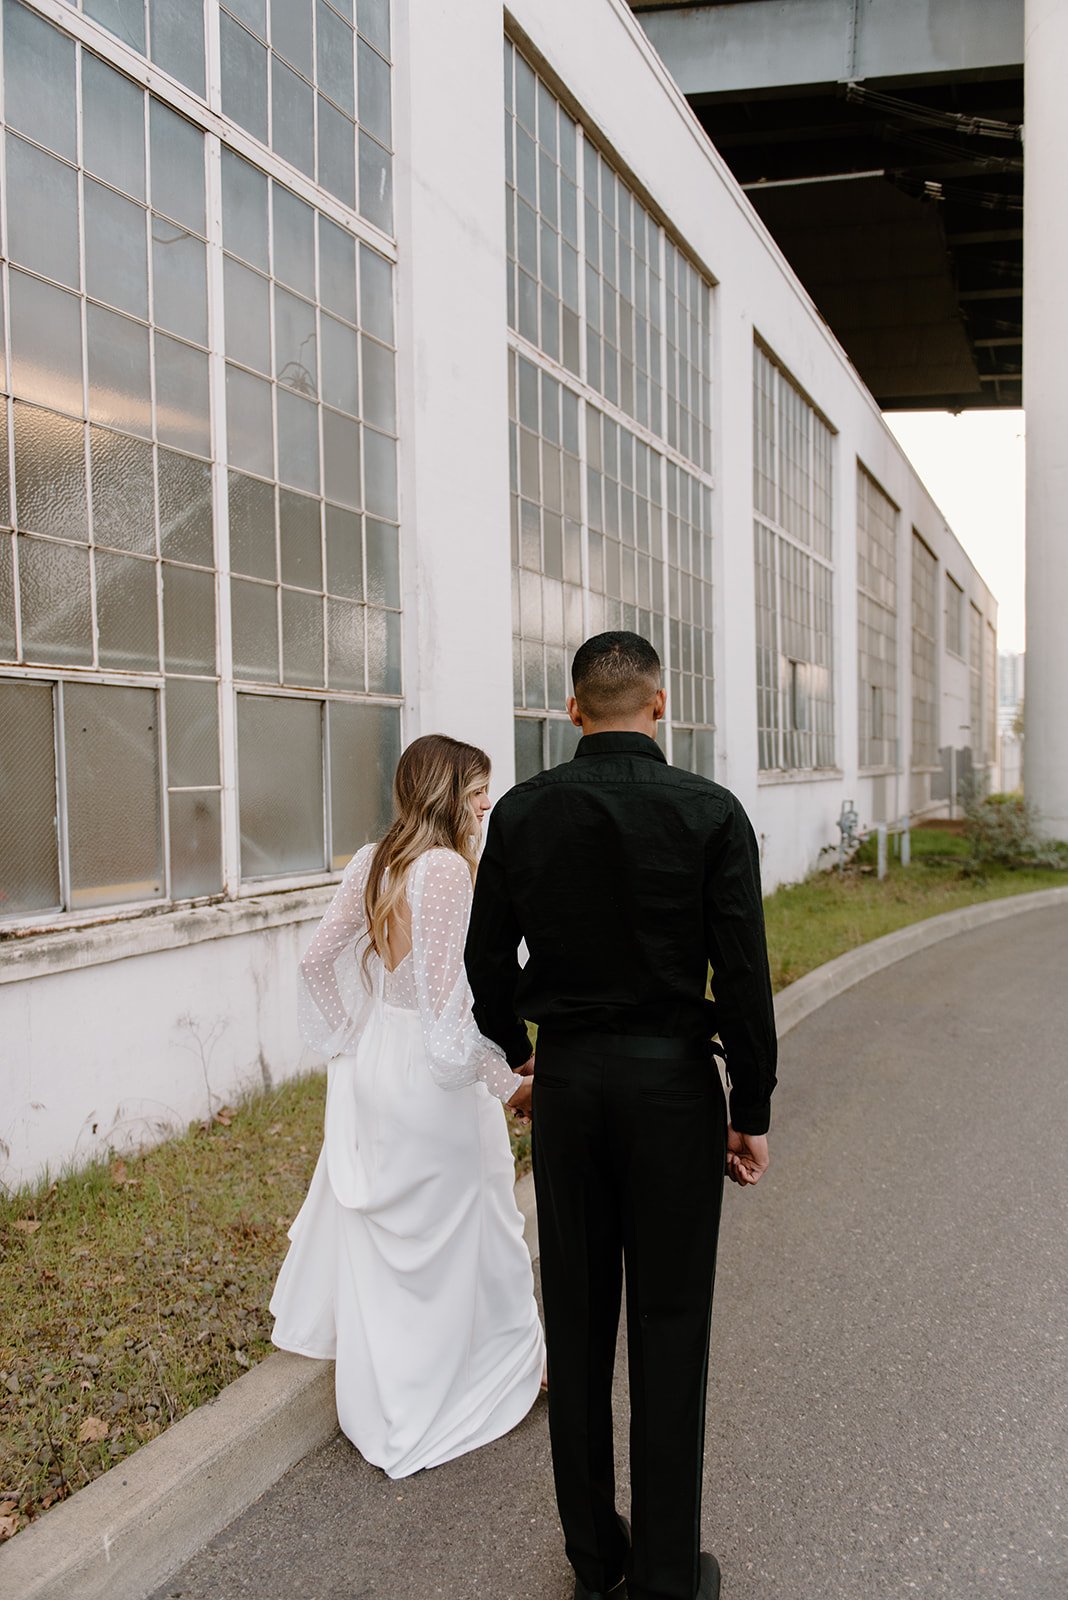 a portland styled wedding shoot with a sheer bodice wedding dress and crepe skirt in a downtown setting.